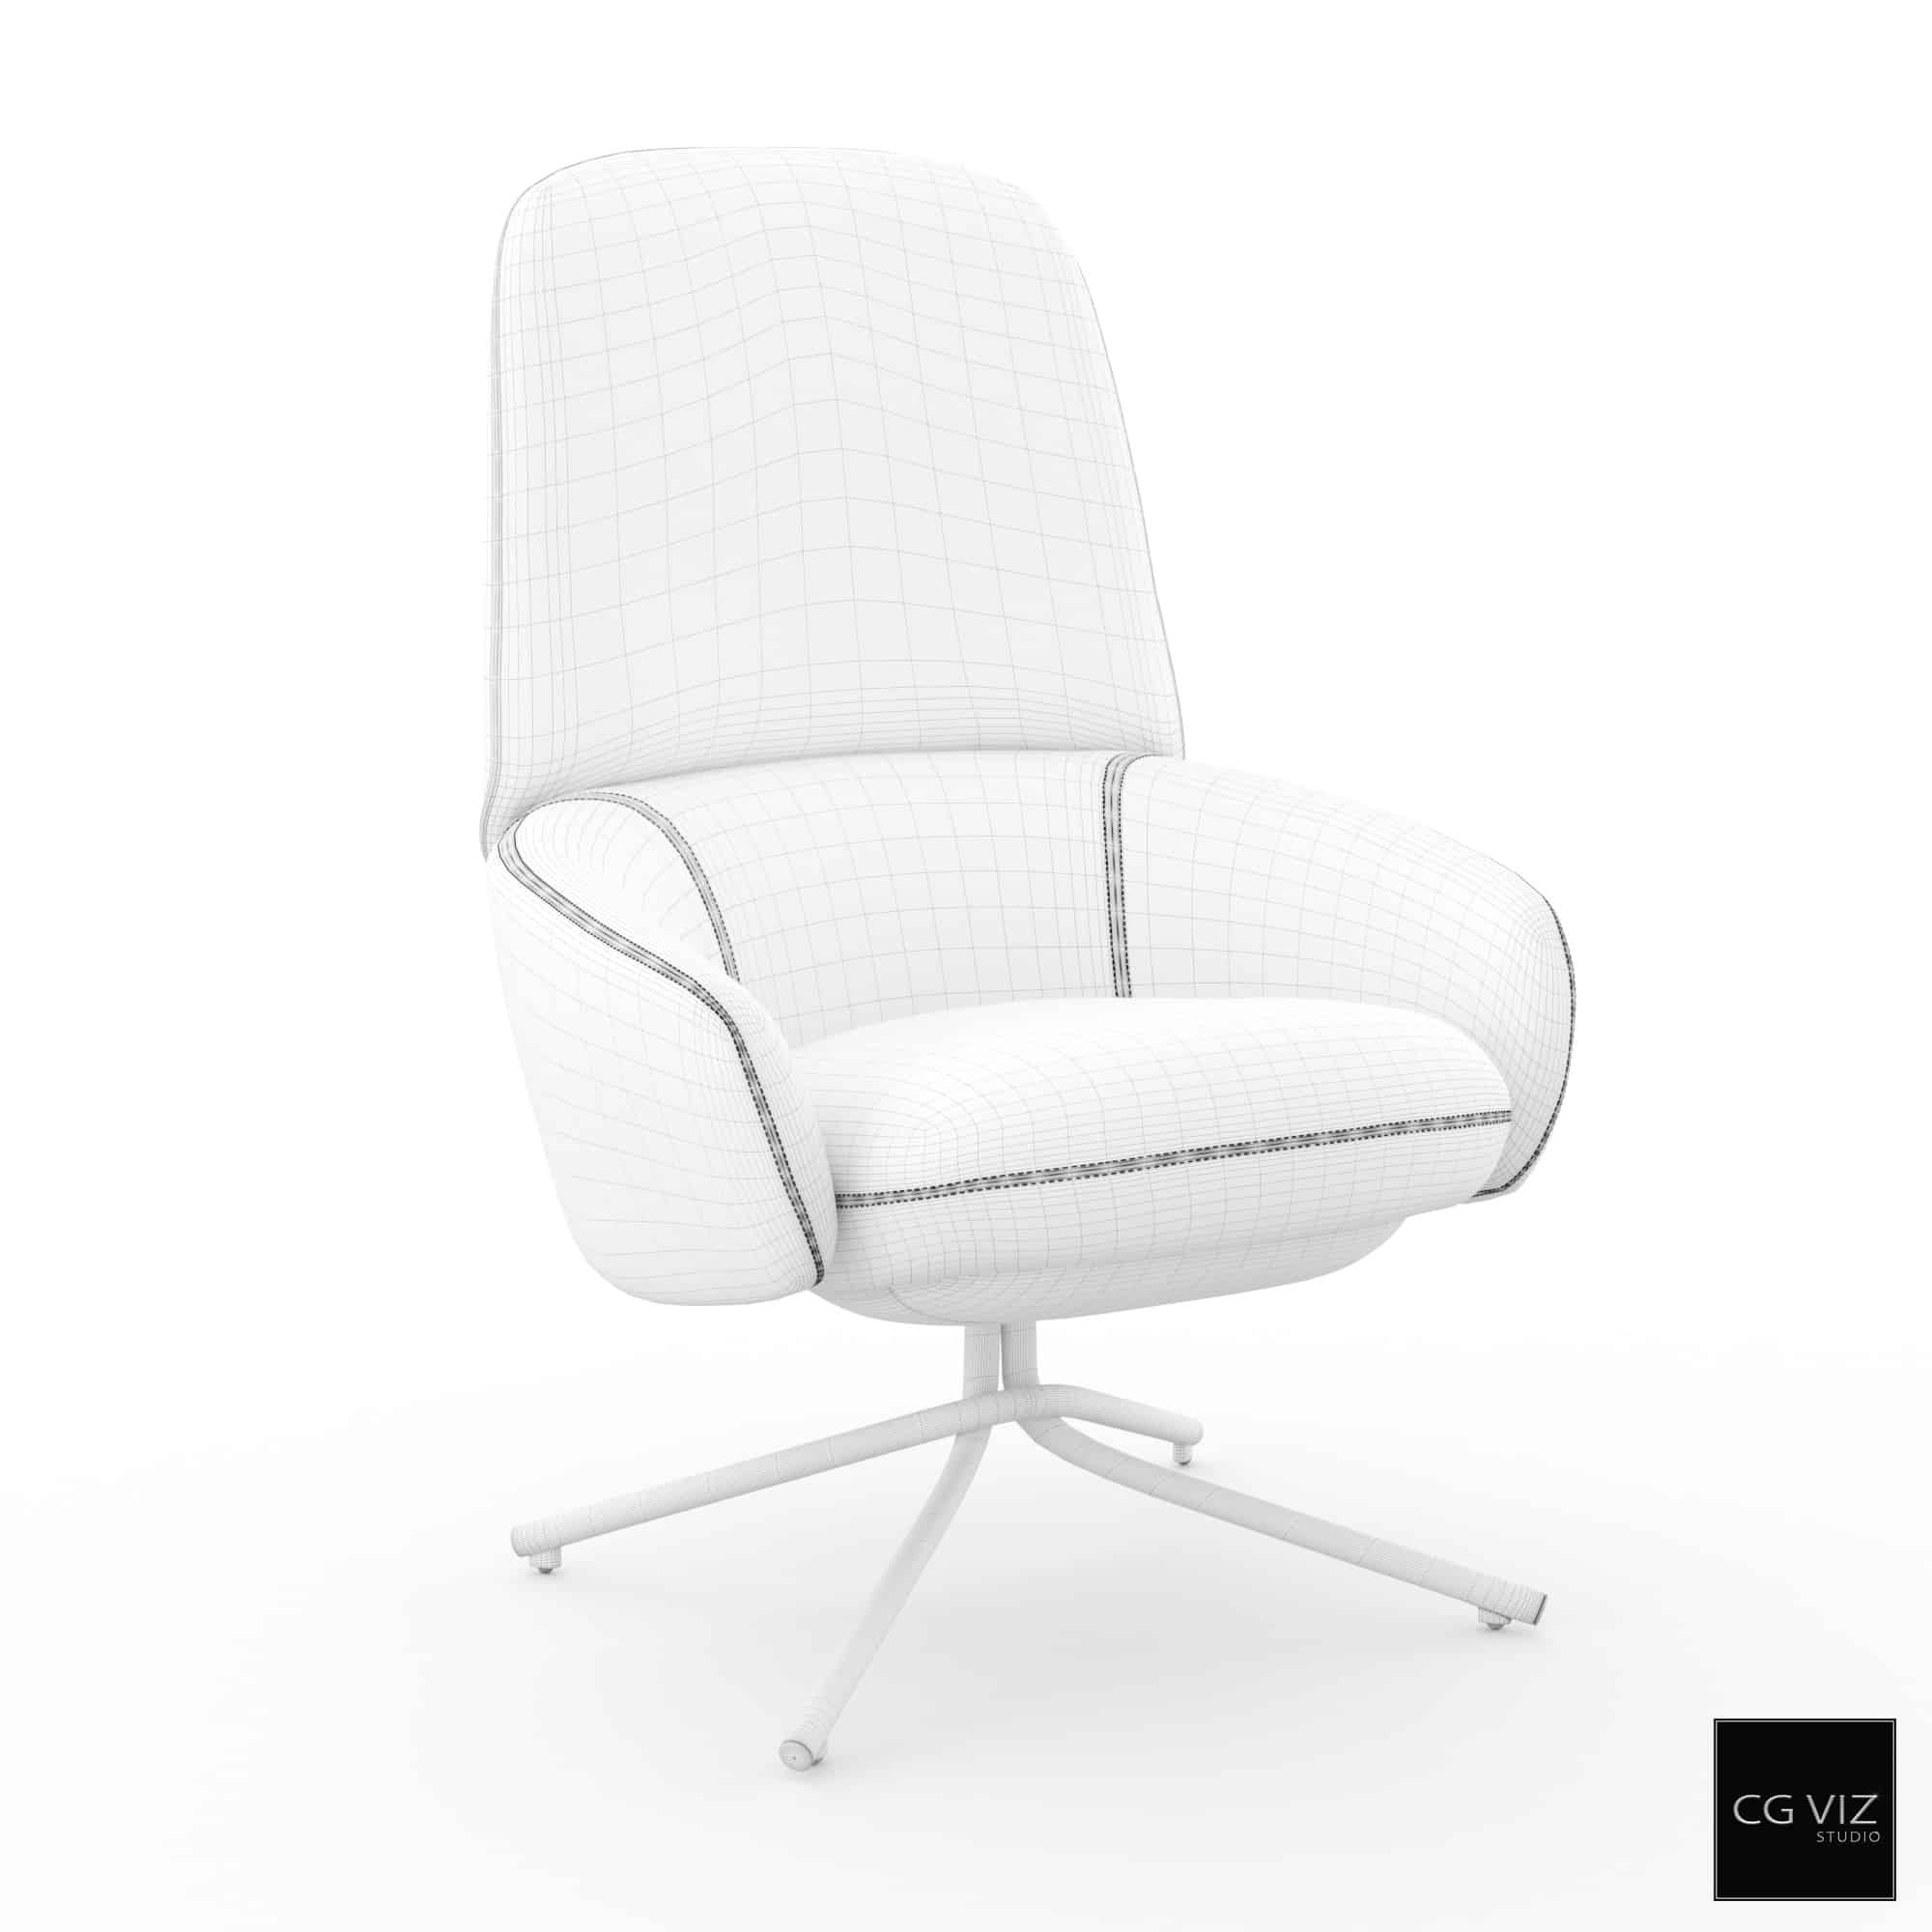 Wireframe View of Calligaris Comfy Lounge Chair Oval 3D Model